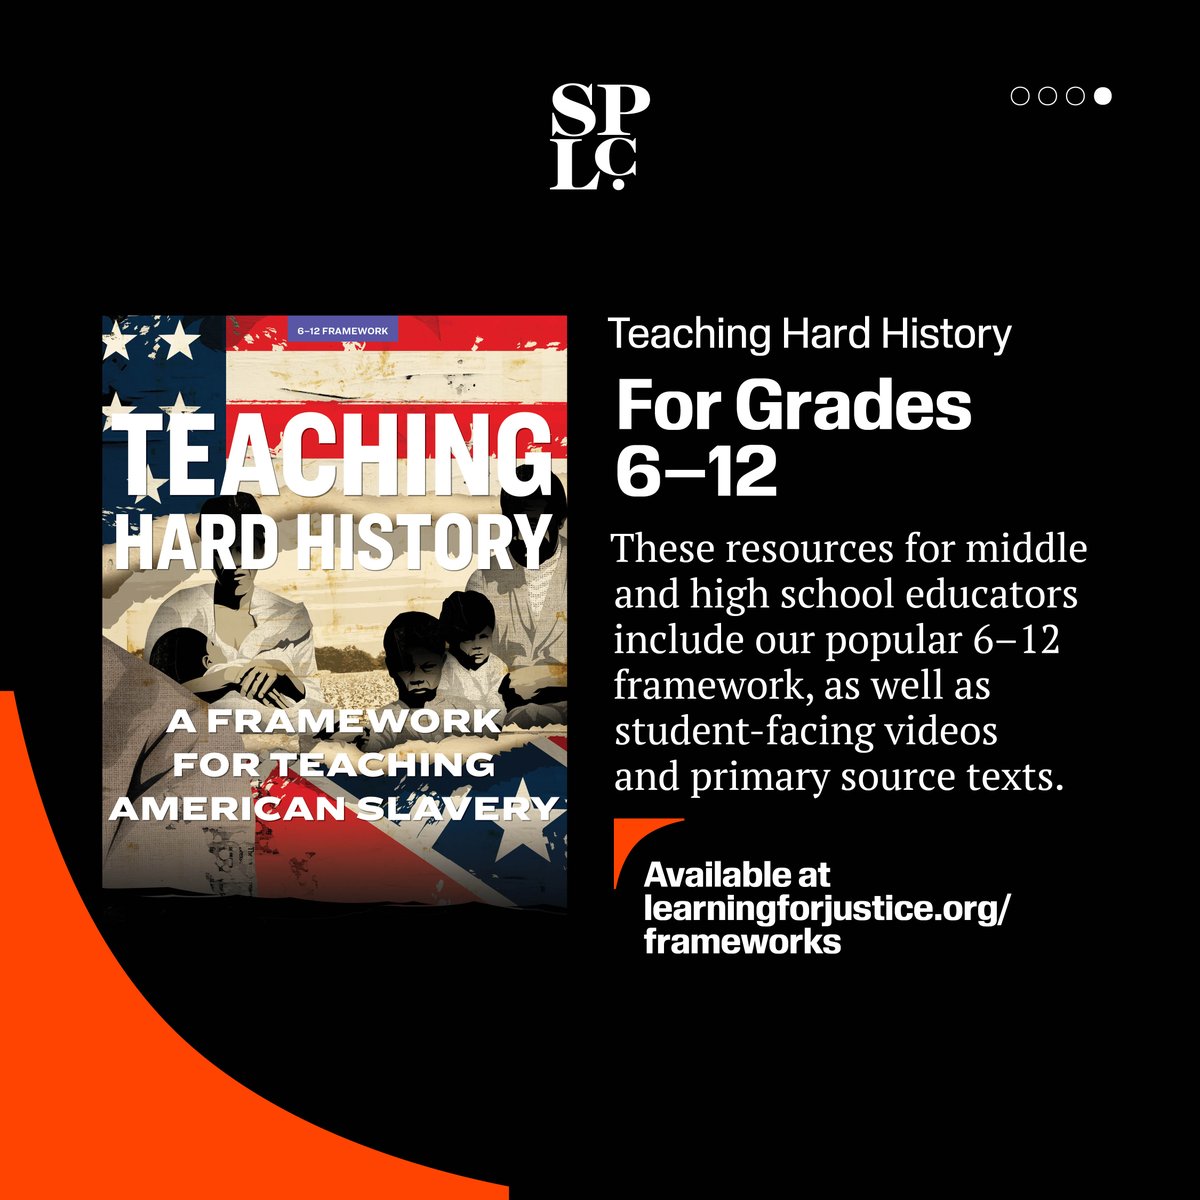 FACT🎯: During the Civil War, the Confederacy fought to maintain slavery - not 'state's rights'.

📲Access @LearnForJustice's #TeachingHardHistory resources that can help you learn & #TeachTruth about U.S. history and the legacy of slavery: bit.ly/40fhiw6

#WhoseHeritage